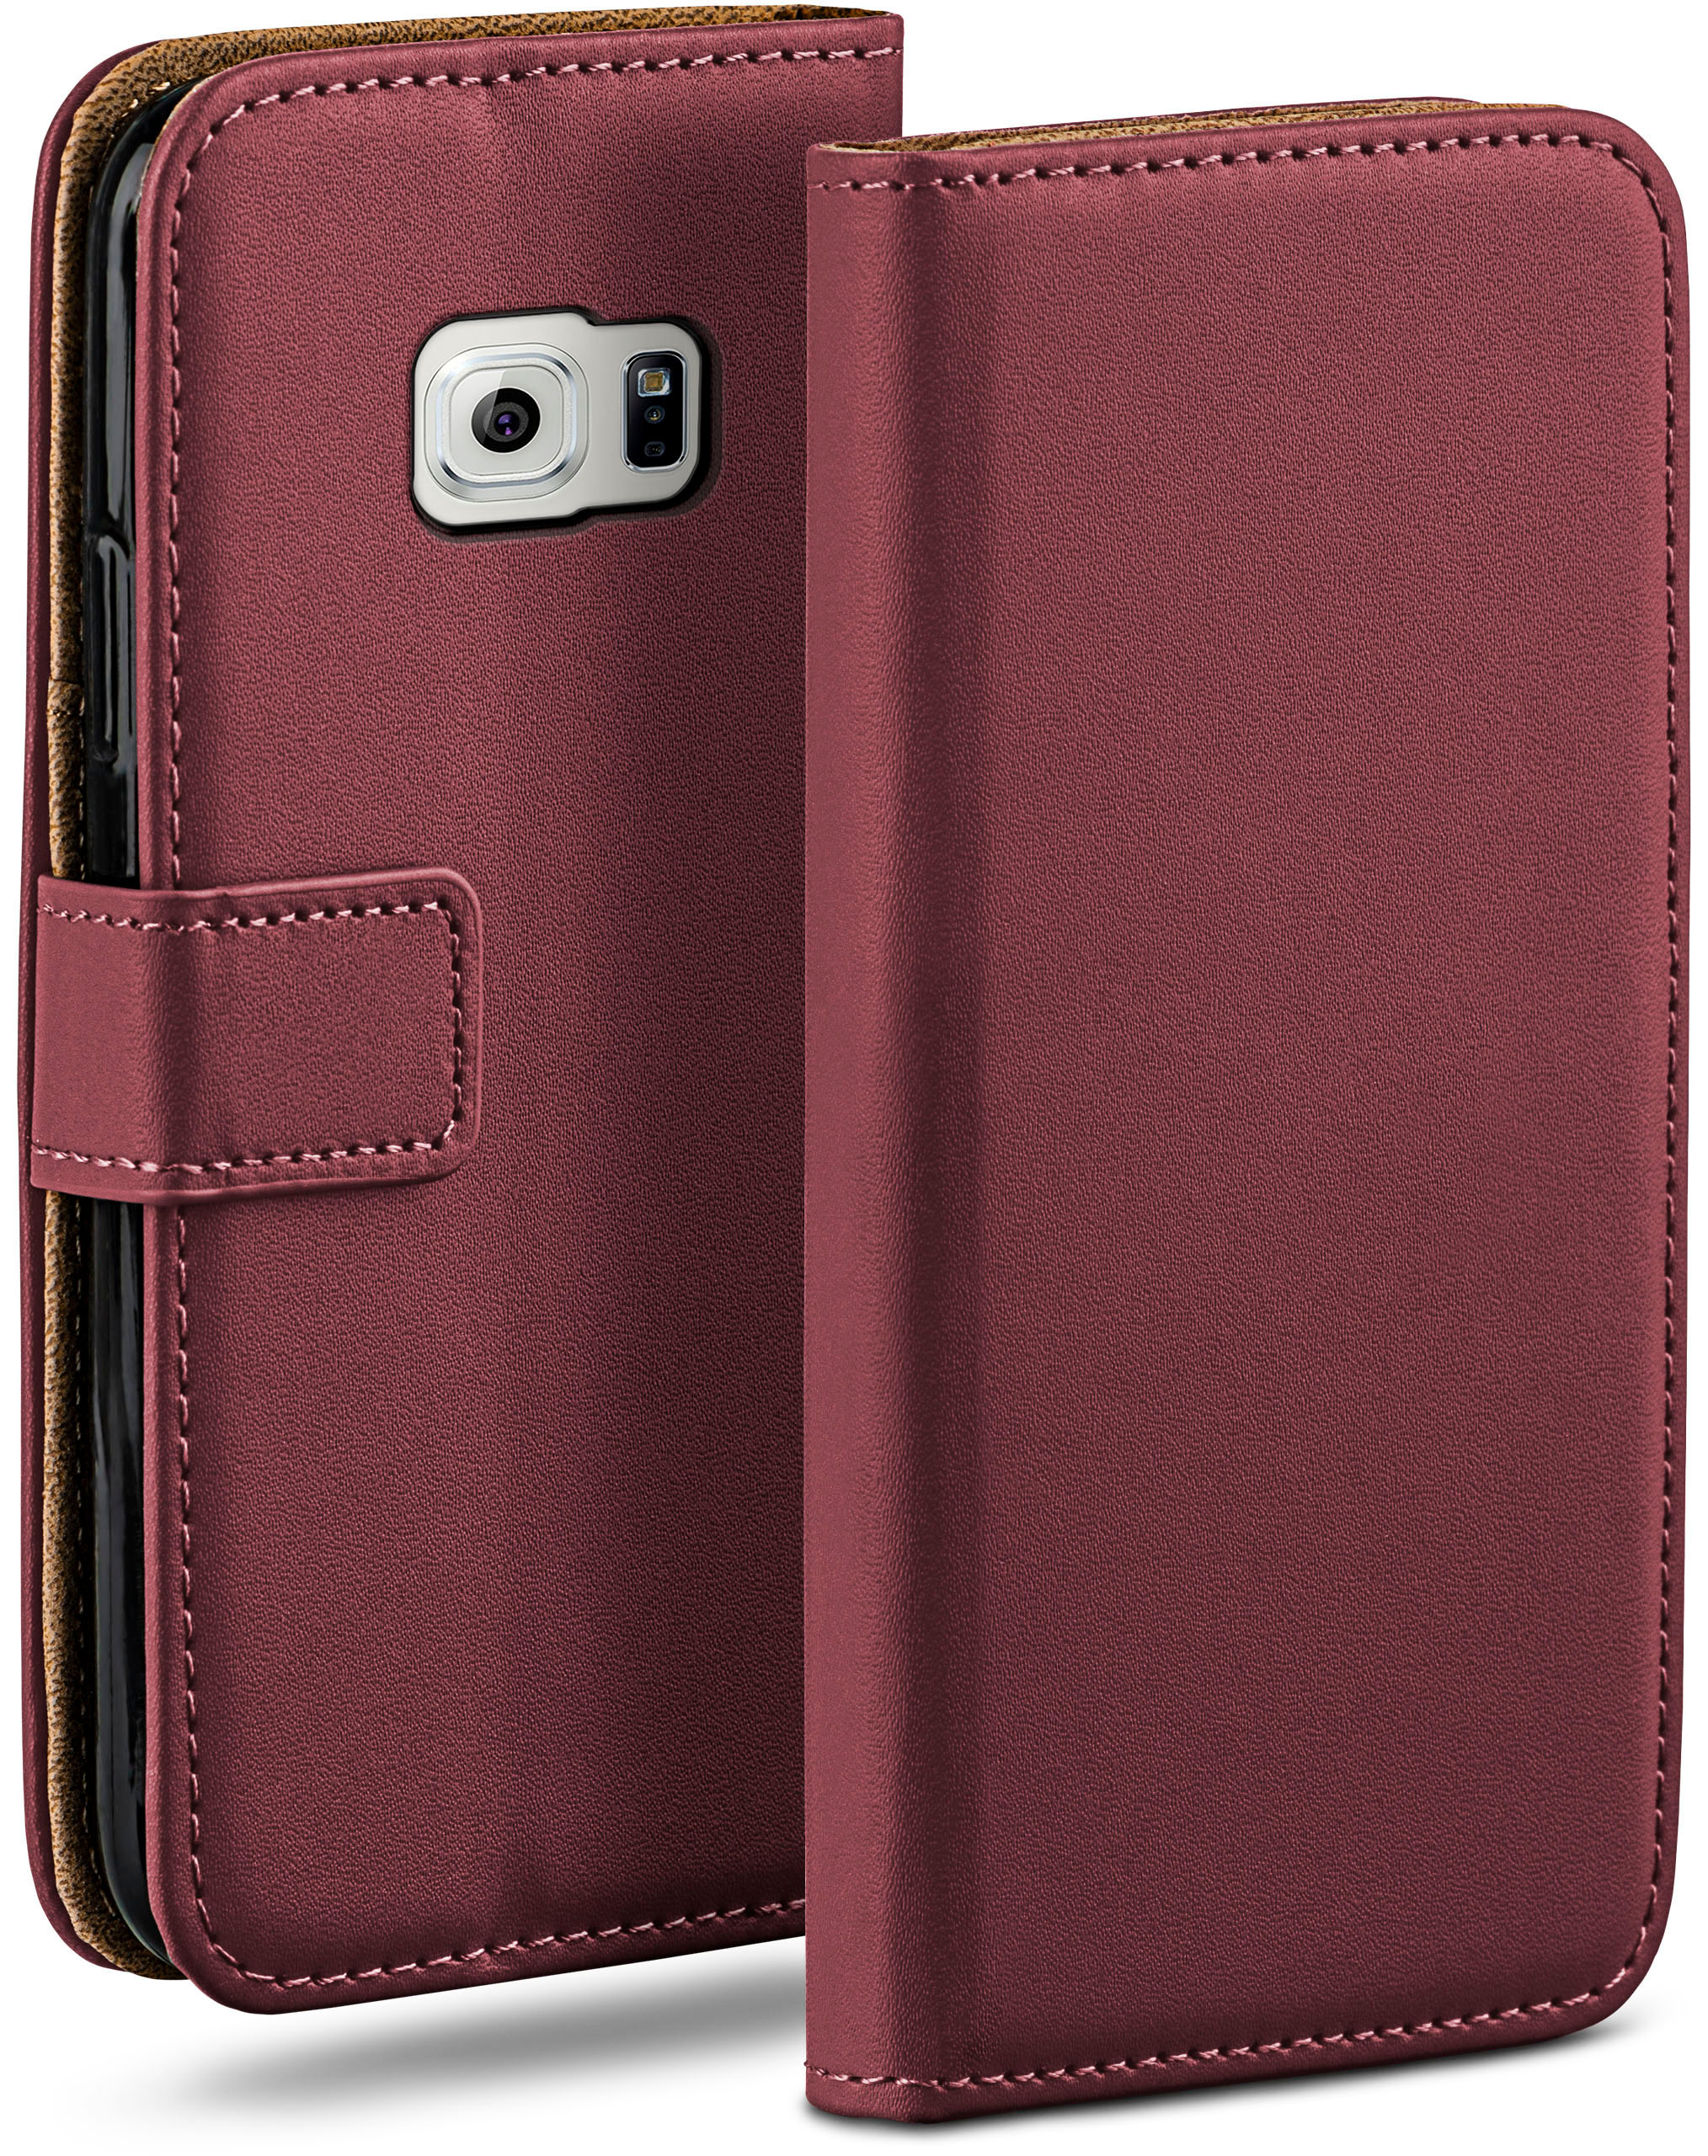 MOEX Book Case, Bookcover, Samsung, Galaxy S6, Maroon-Red